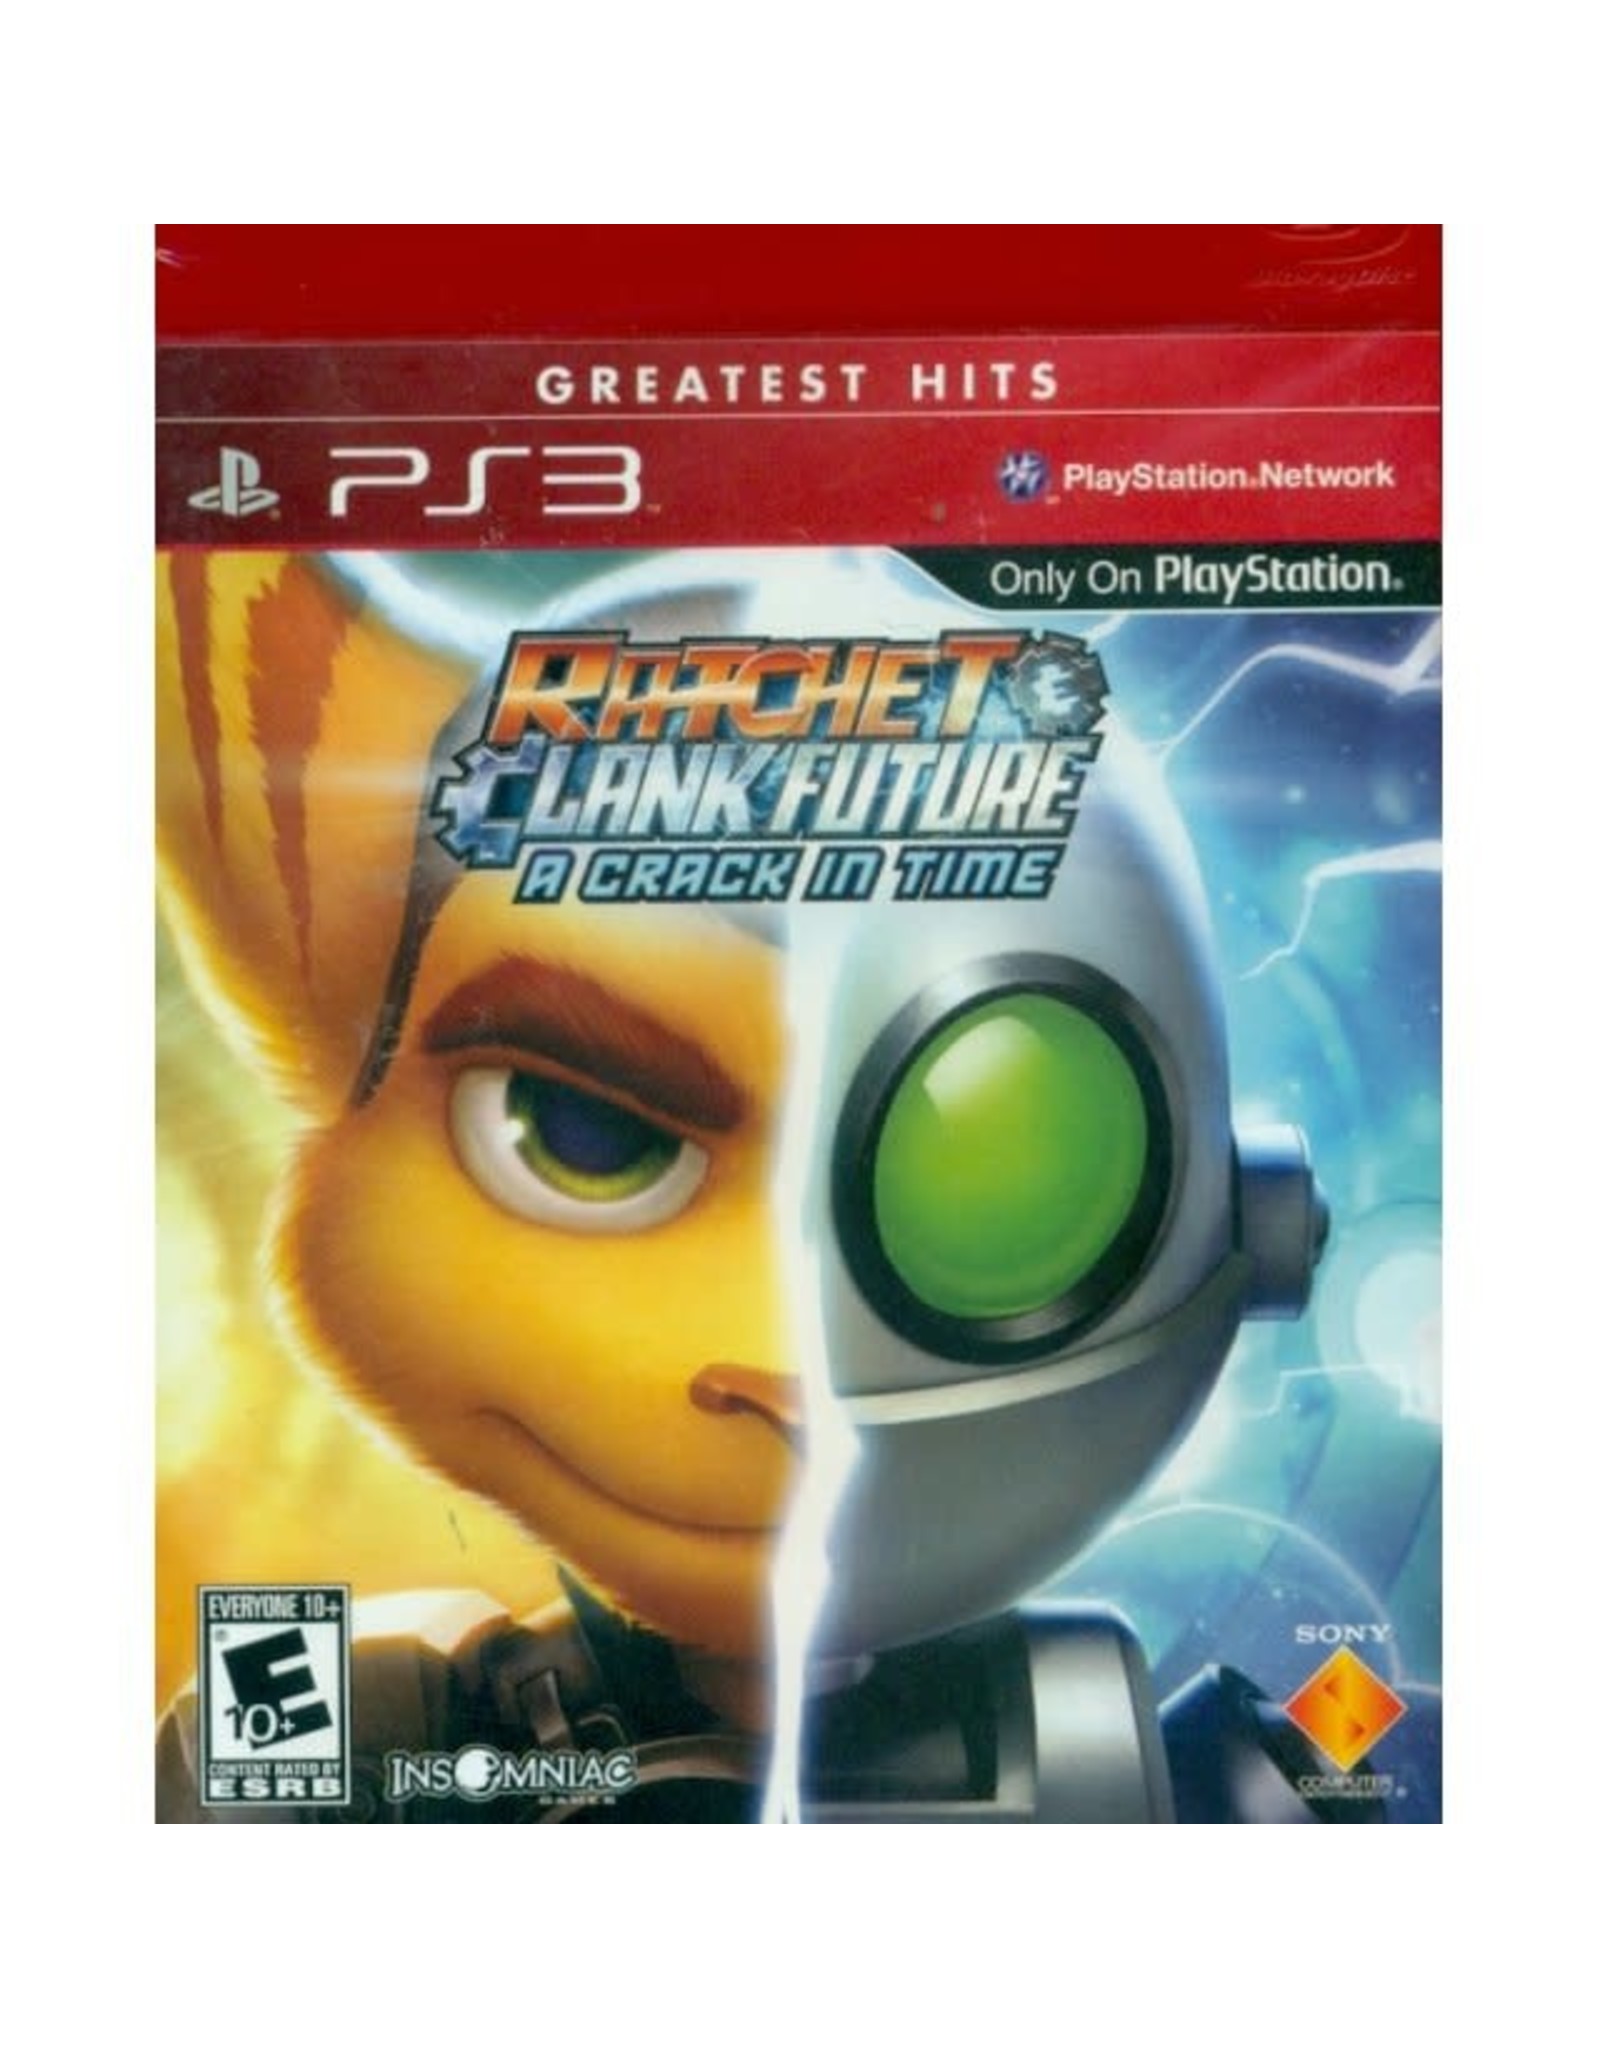 Playstation 3 Ratchet & Clank Future: A Crack in Time (Greatest Hits, Brand New!)